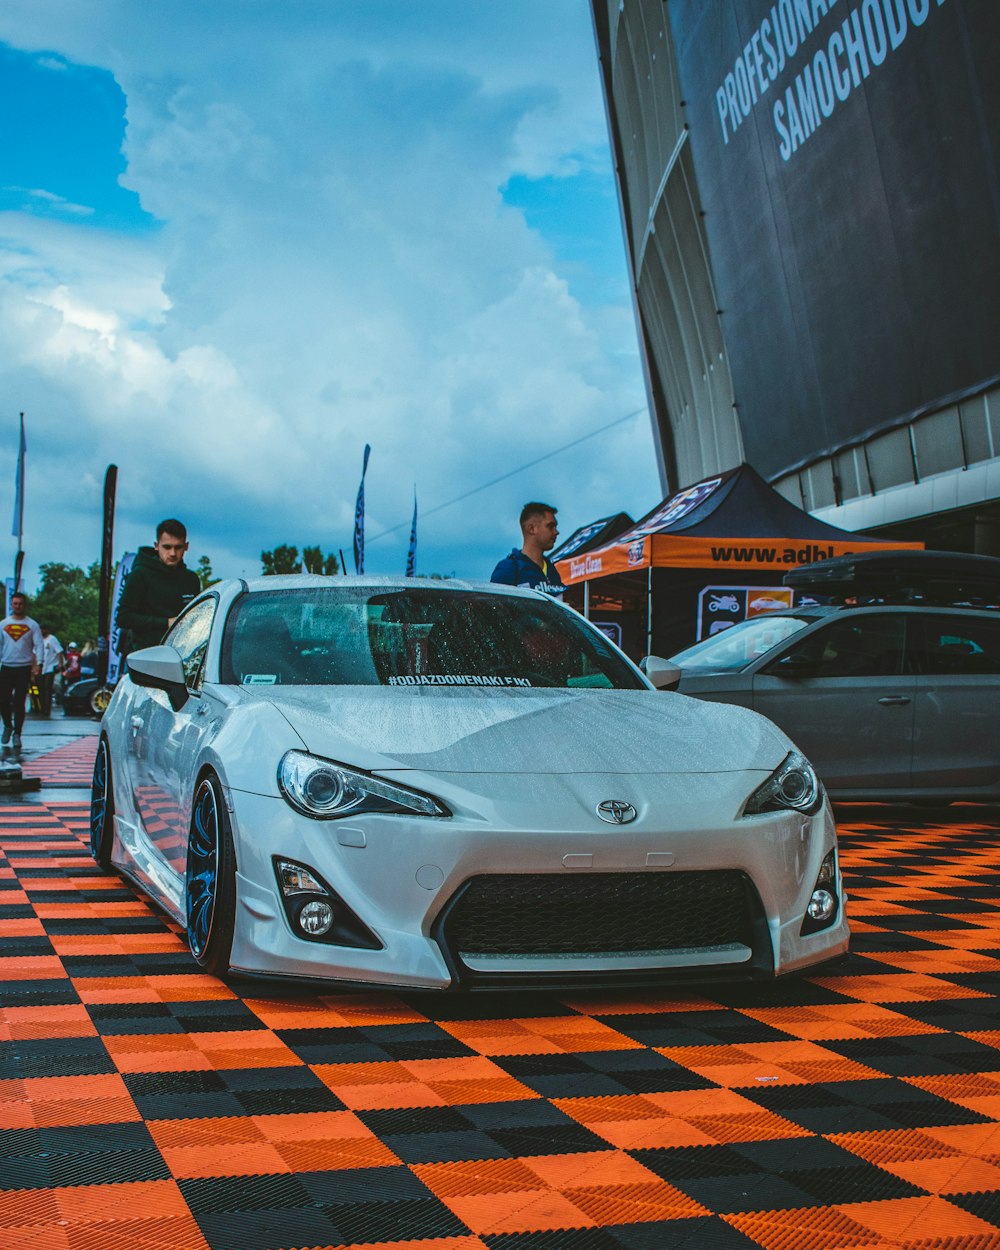 a white sports car parked on a checkered floor